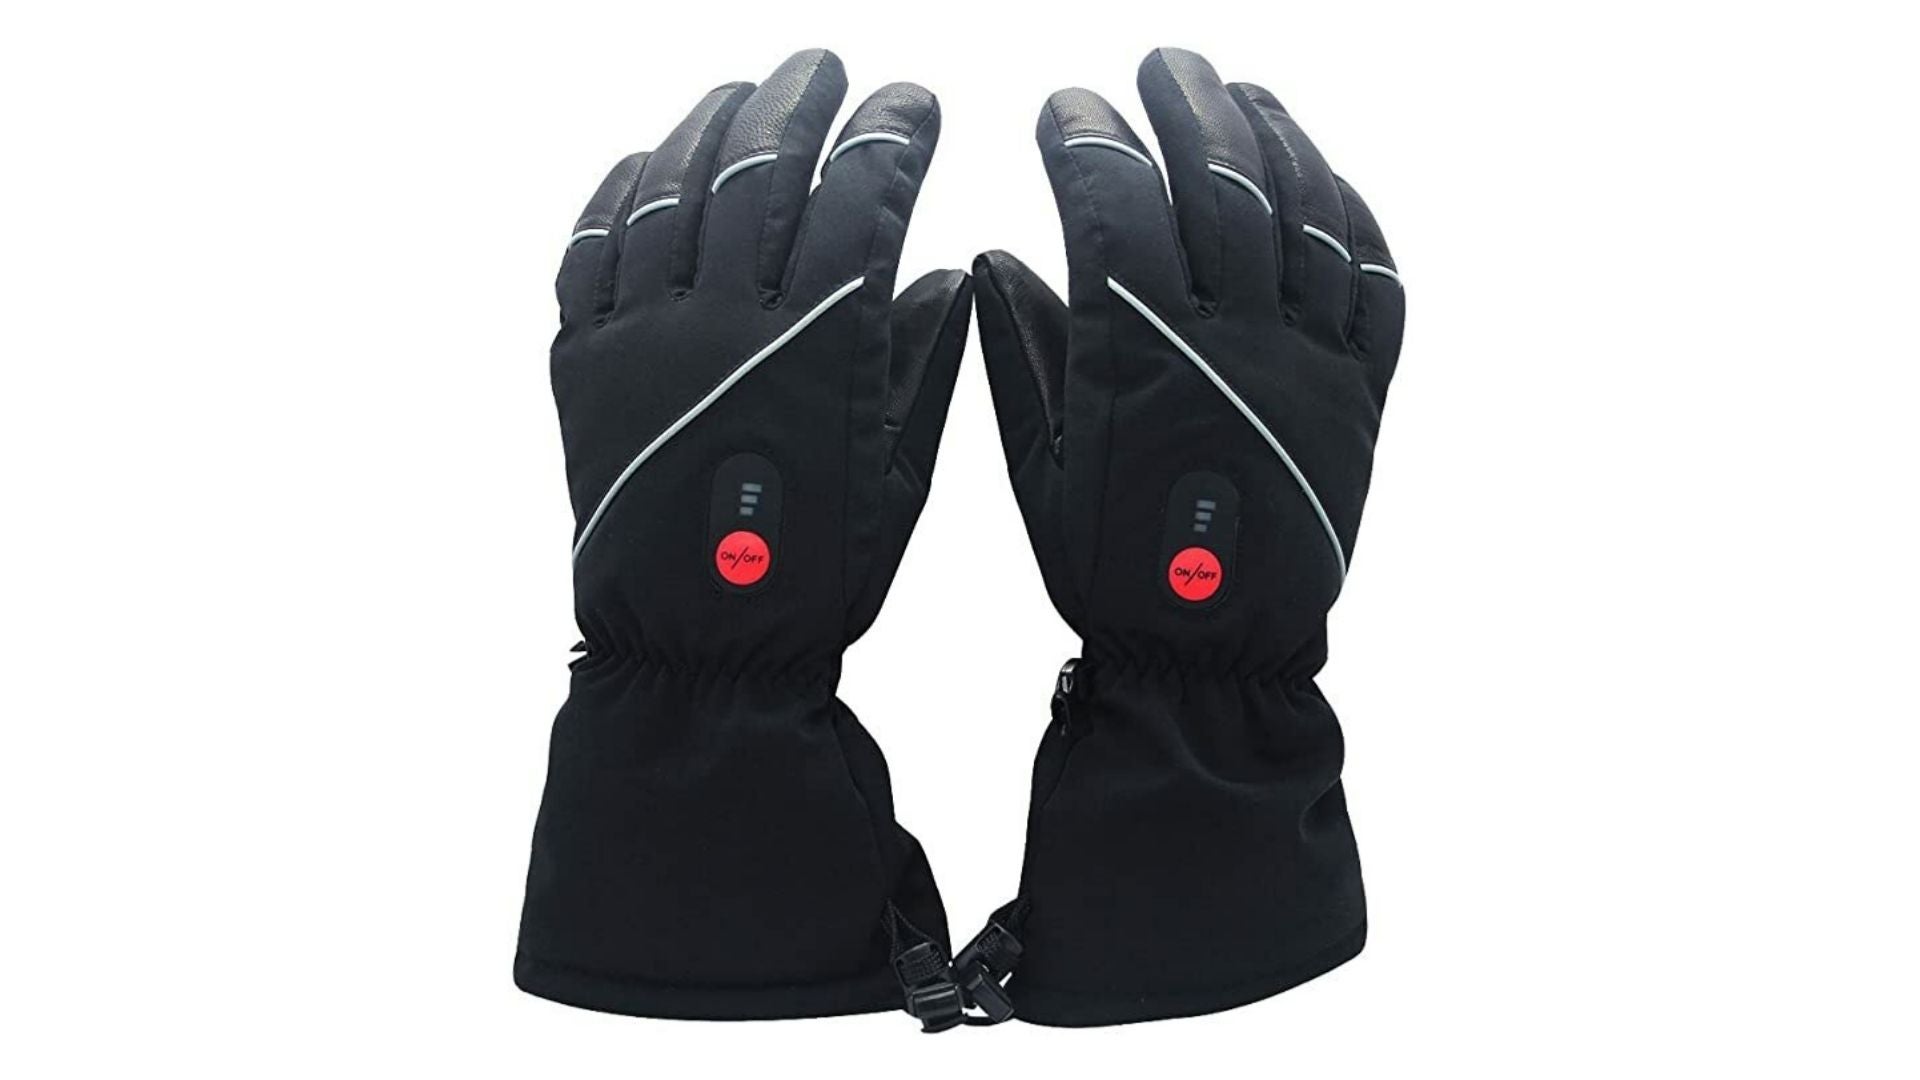 NEW $200 Mens Rossignol Winters Fire Electric Battery Powered Heated Ski Gloves 